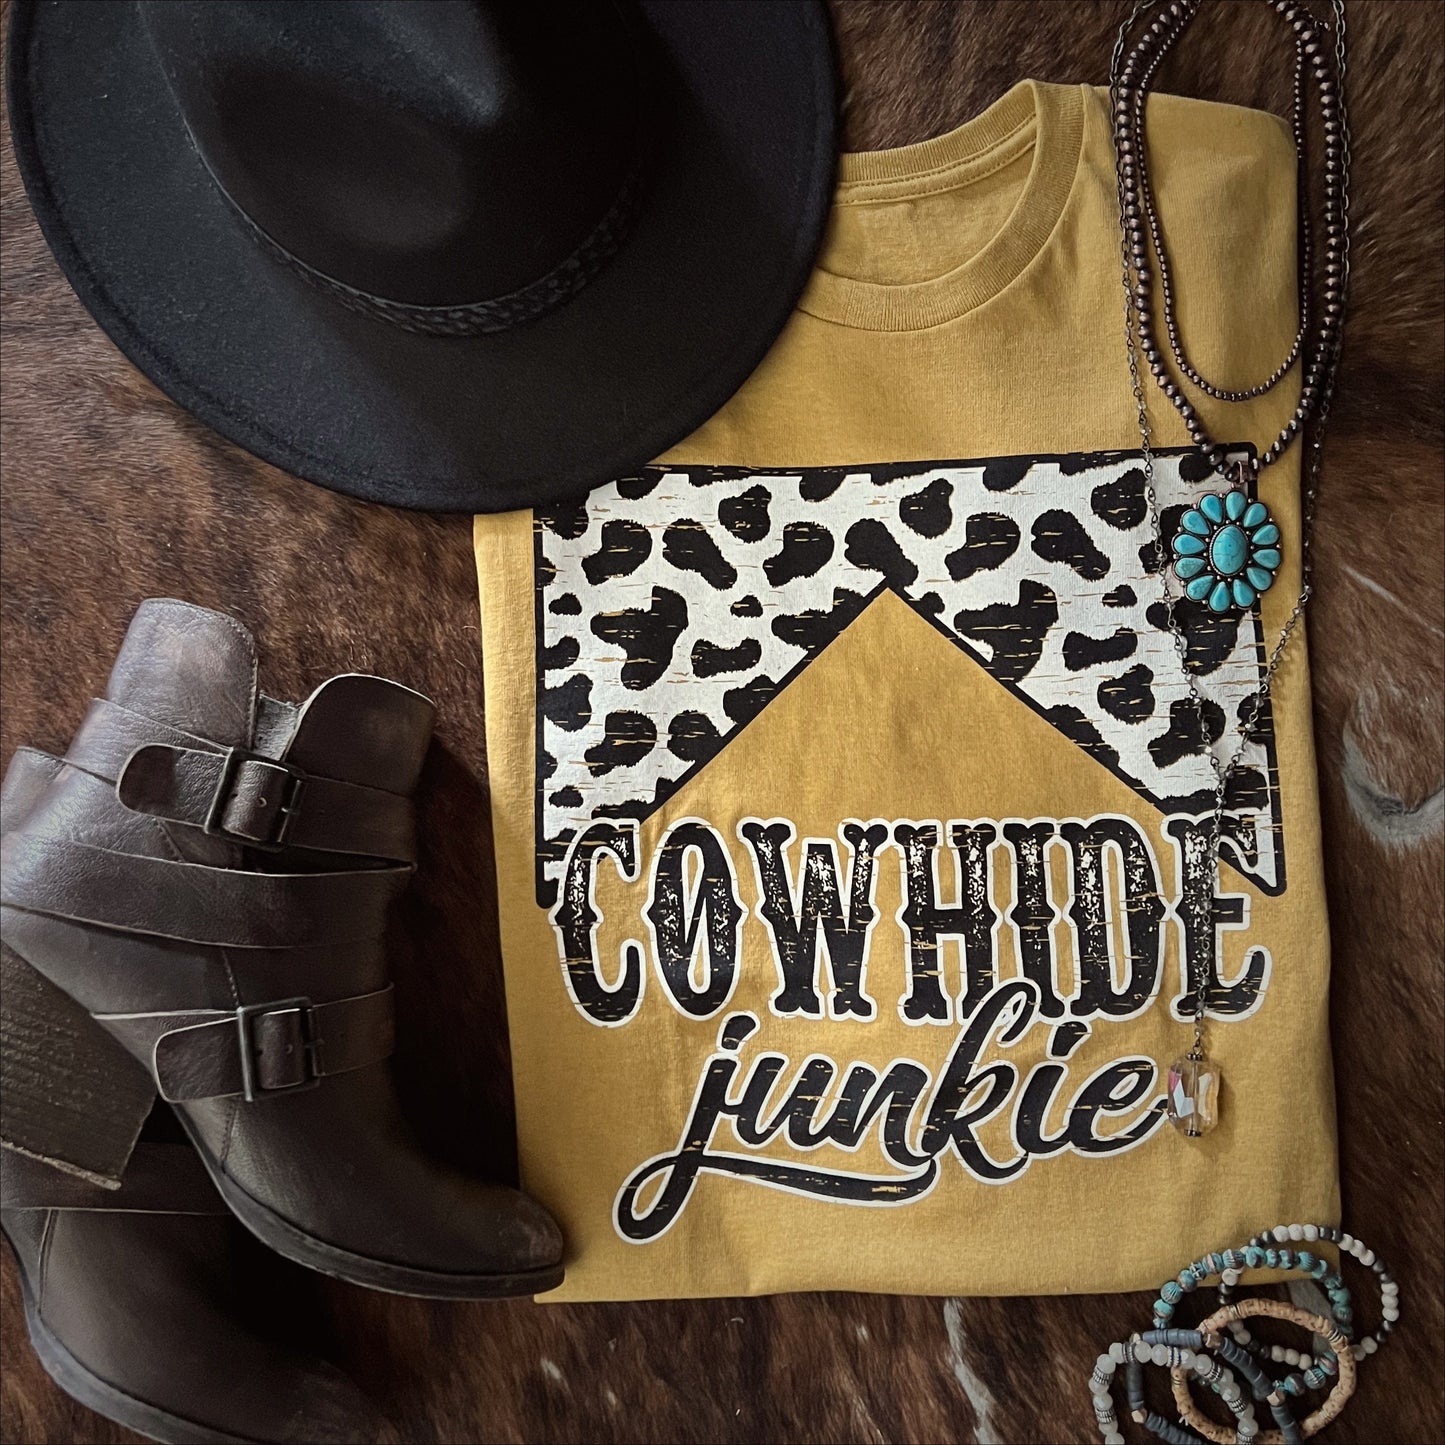 Envy Stylz Boutique Women - Apparel - Shirts - T-Shirts Cowhide Junkie Graphic Tee